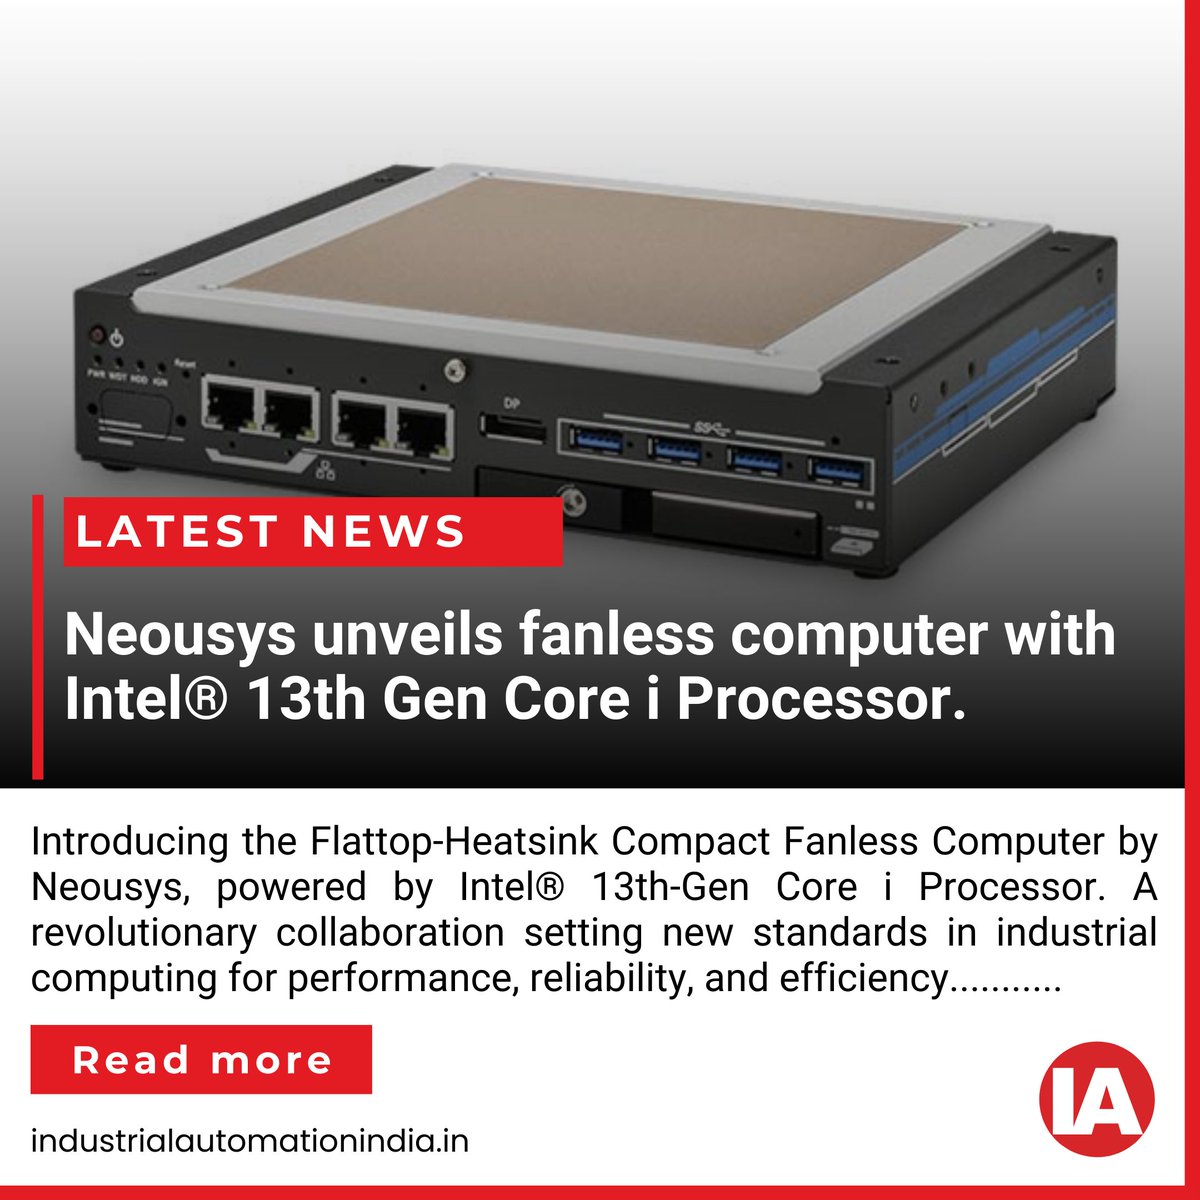 🚀💻 Neousys Technology unveils its latest innovation the Flattop-Heatsink Compact Fanless Computer powered by Intel Corporation® 13th-Gen Core i Processor, setting new standards in industrial computing! 🛠️🔧

Read More- industrialautomationindia.in/newsitm/17961/…